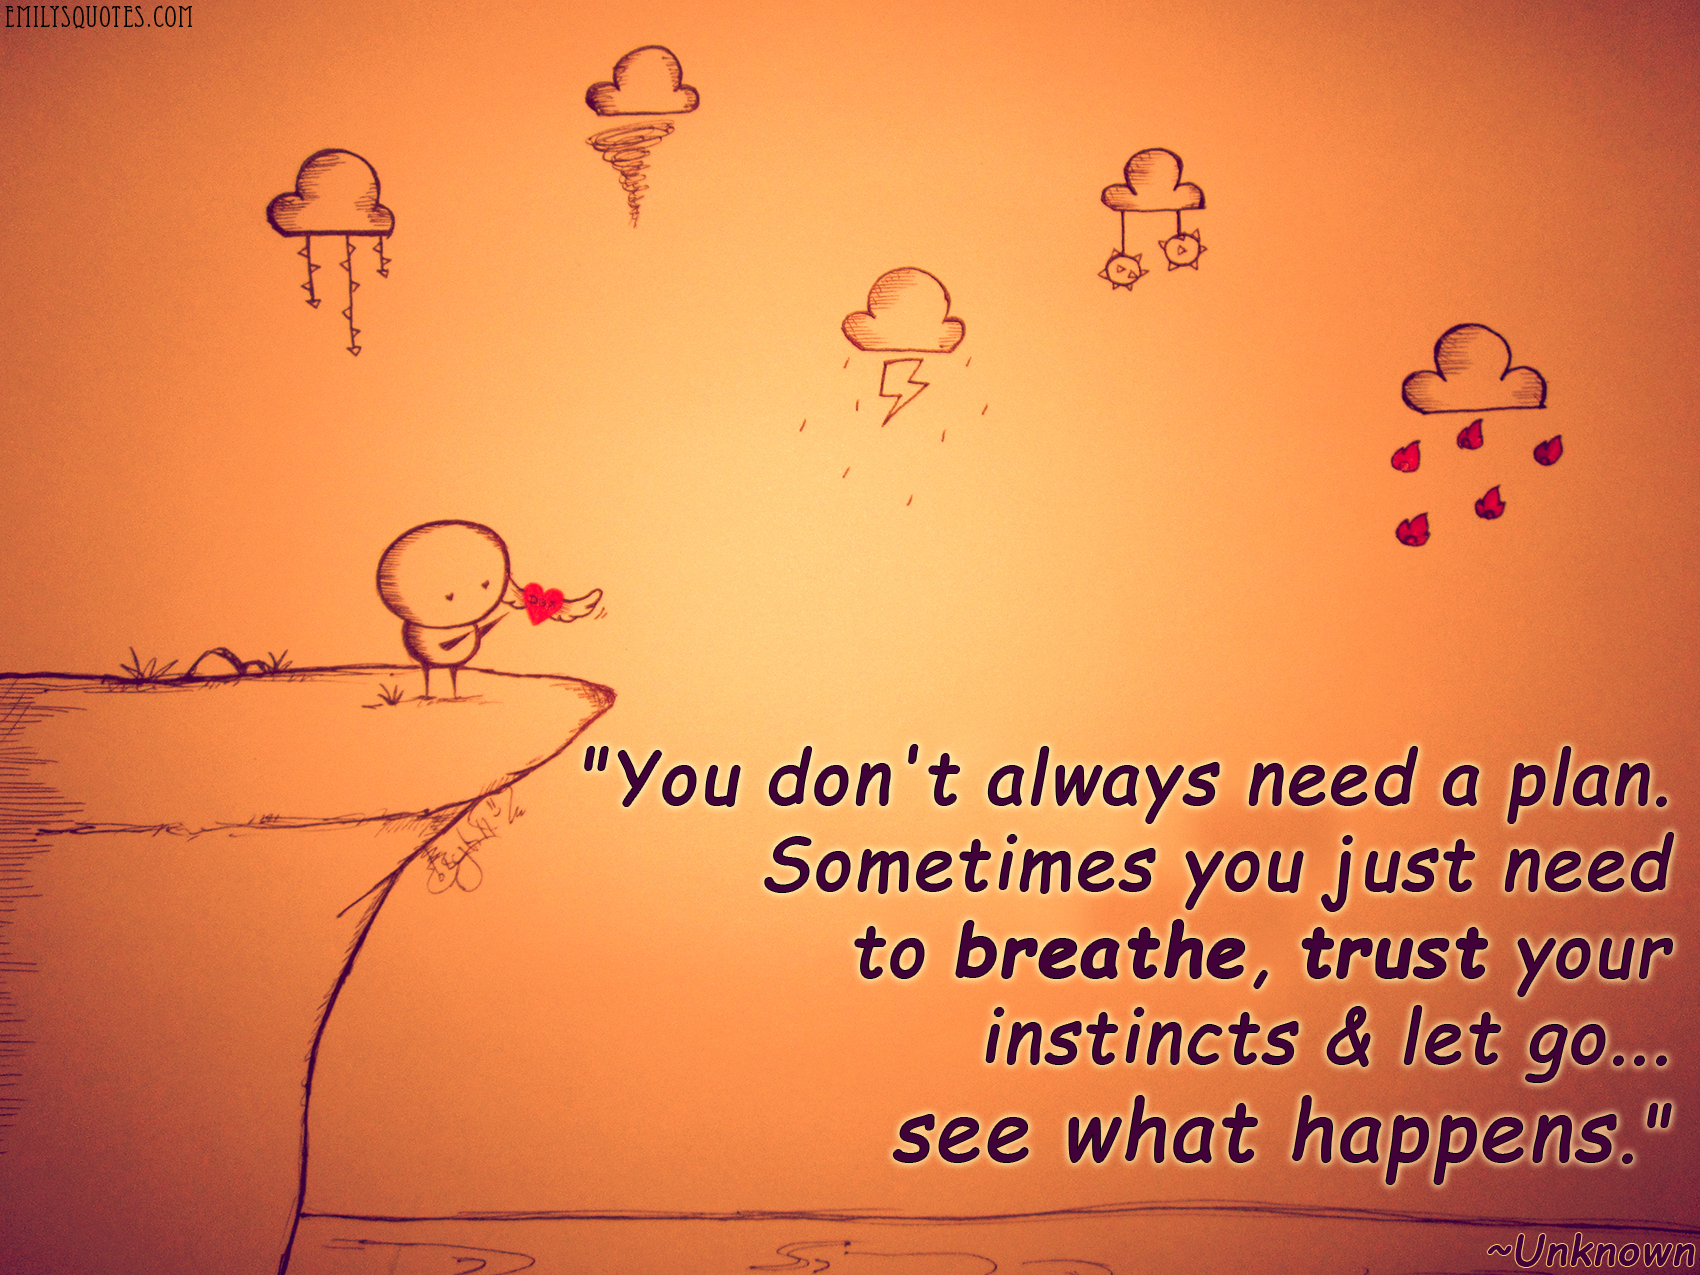 You don’t always need a plan. Sometimes you just need to breathe, trust your instincts & let go…see what happens